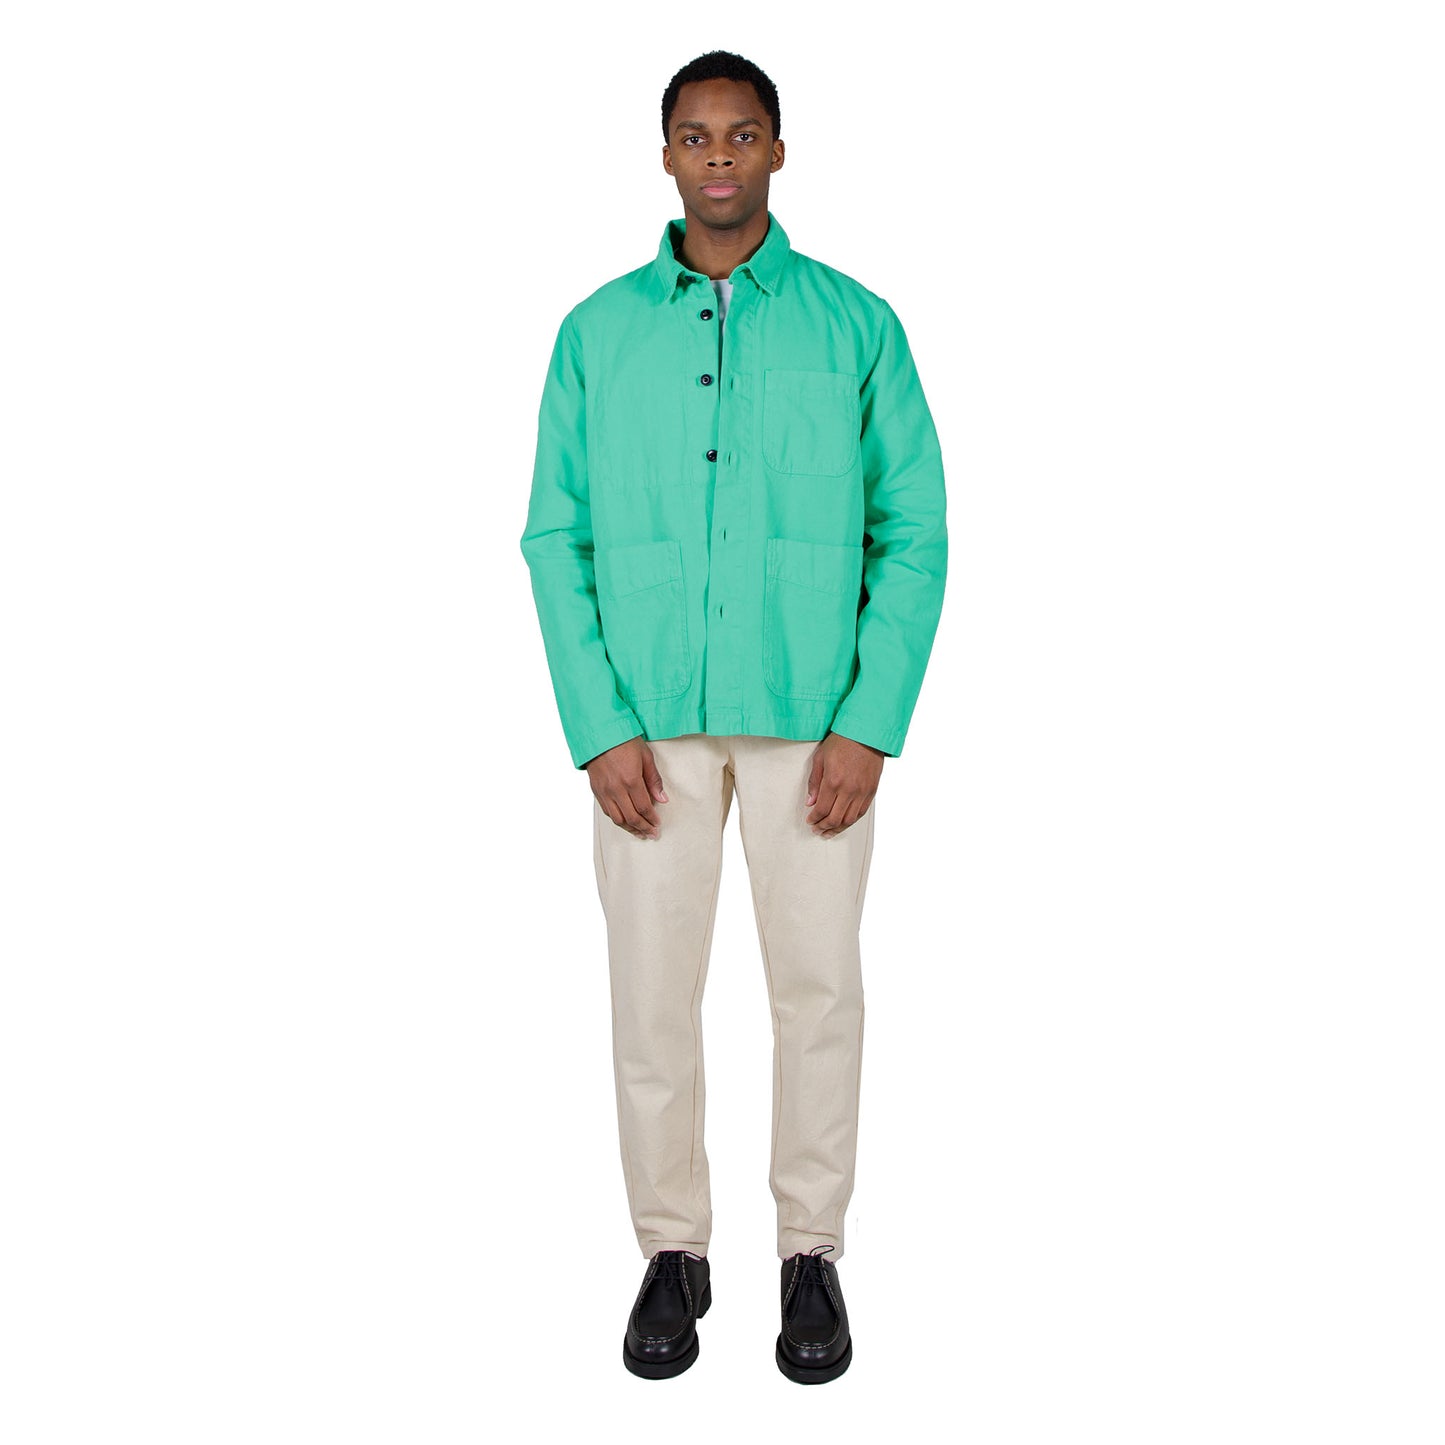 Albam Foundry Shirt in Bright Green